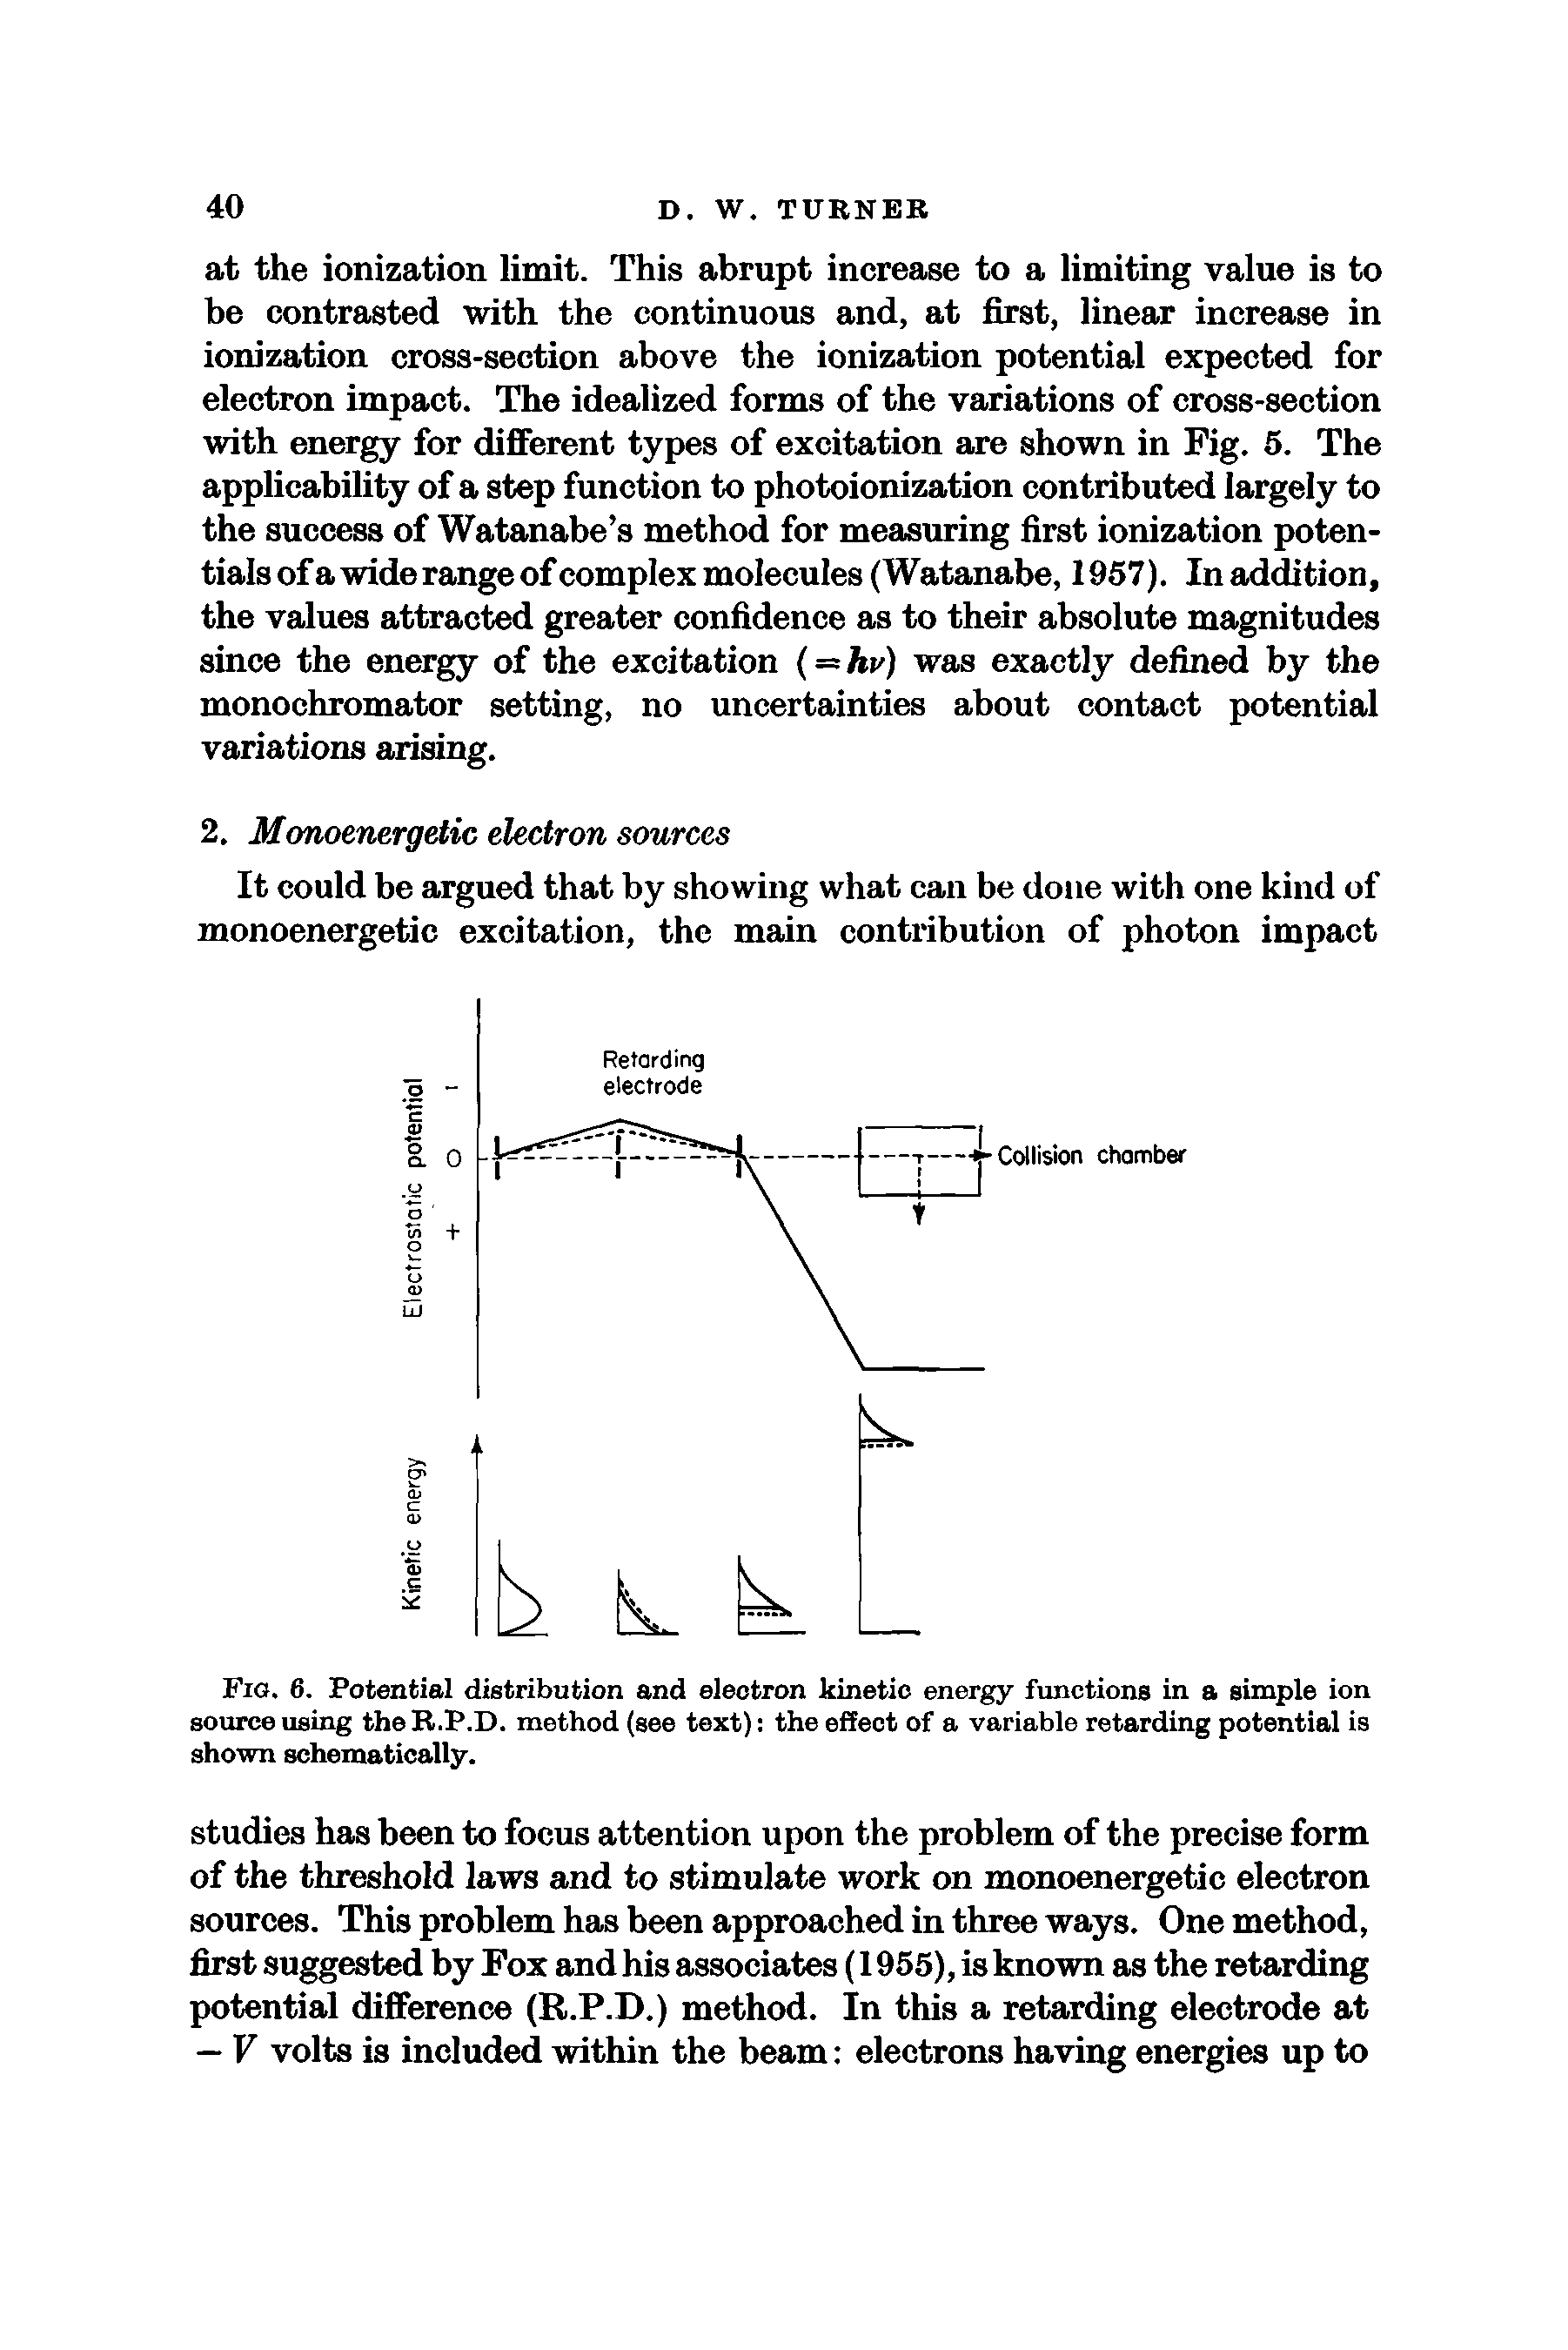 Fig. 6. Potential distribution and electron kinetic energy functions in a simple ion source using the R.P.D. method (see text) the effect of a variable retarding potential is shown schematically.